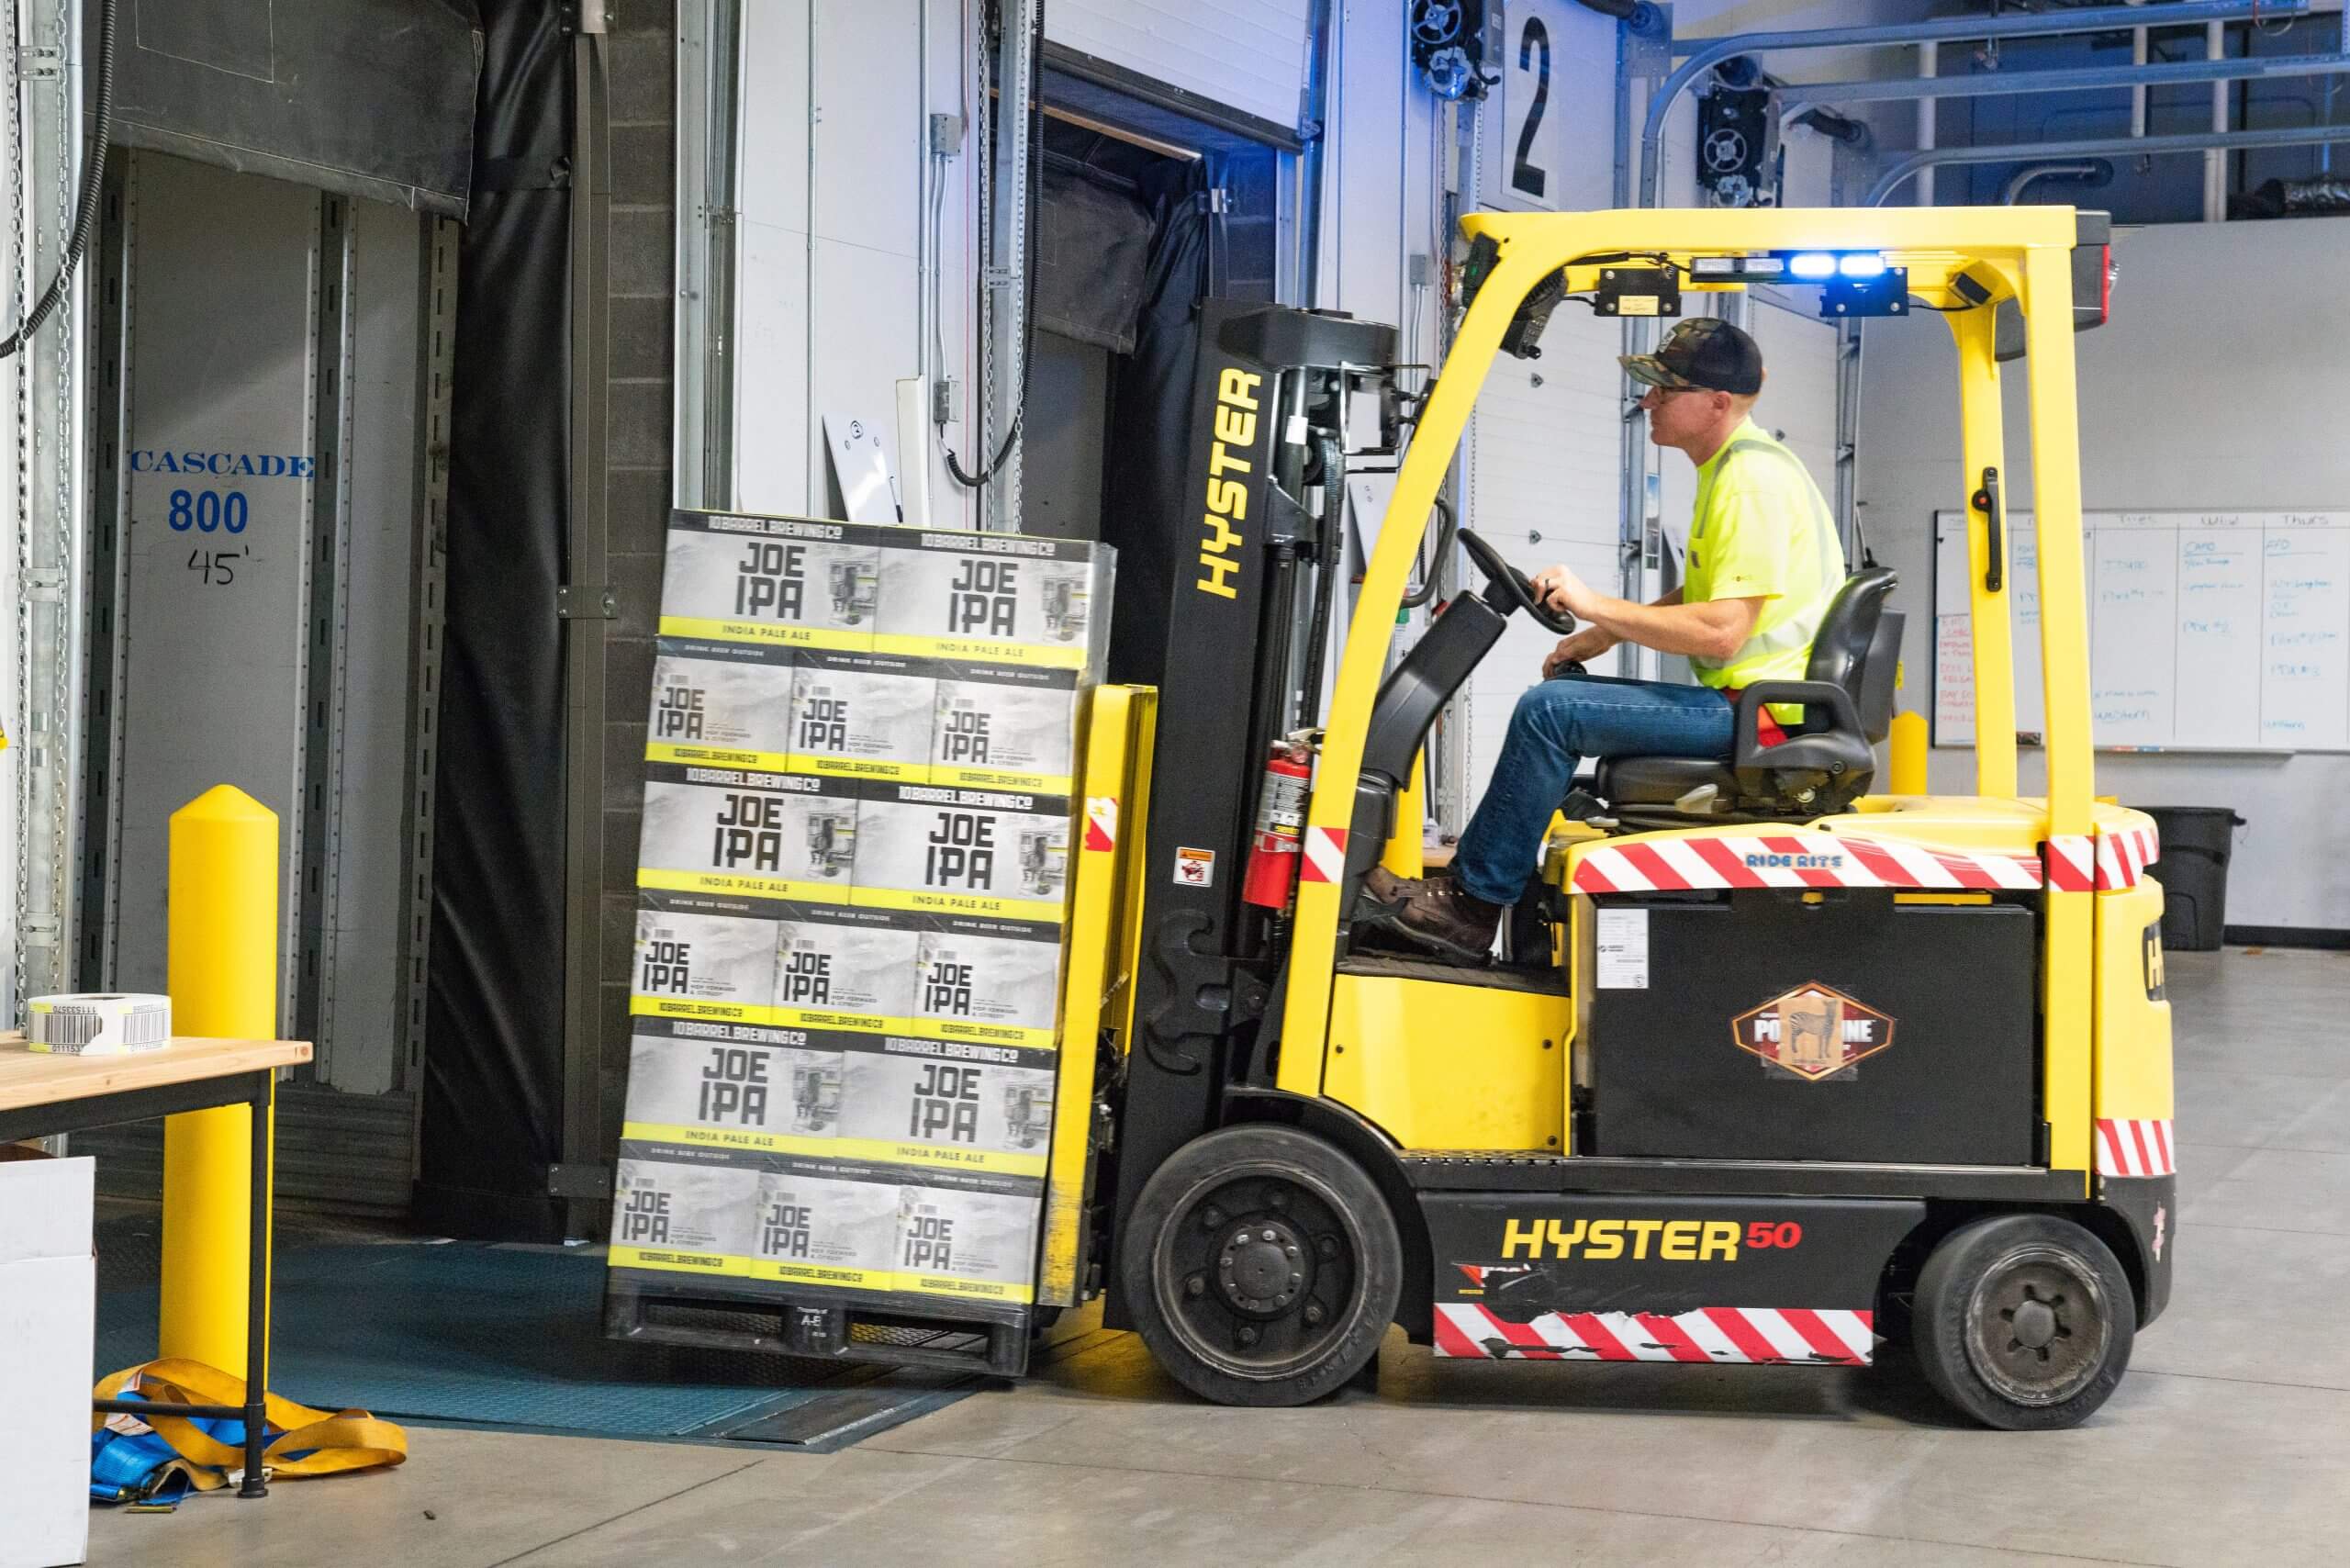 Lone worker moving boxes on forklift